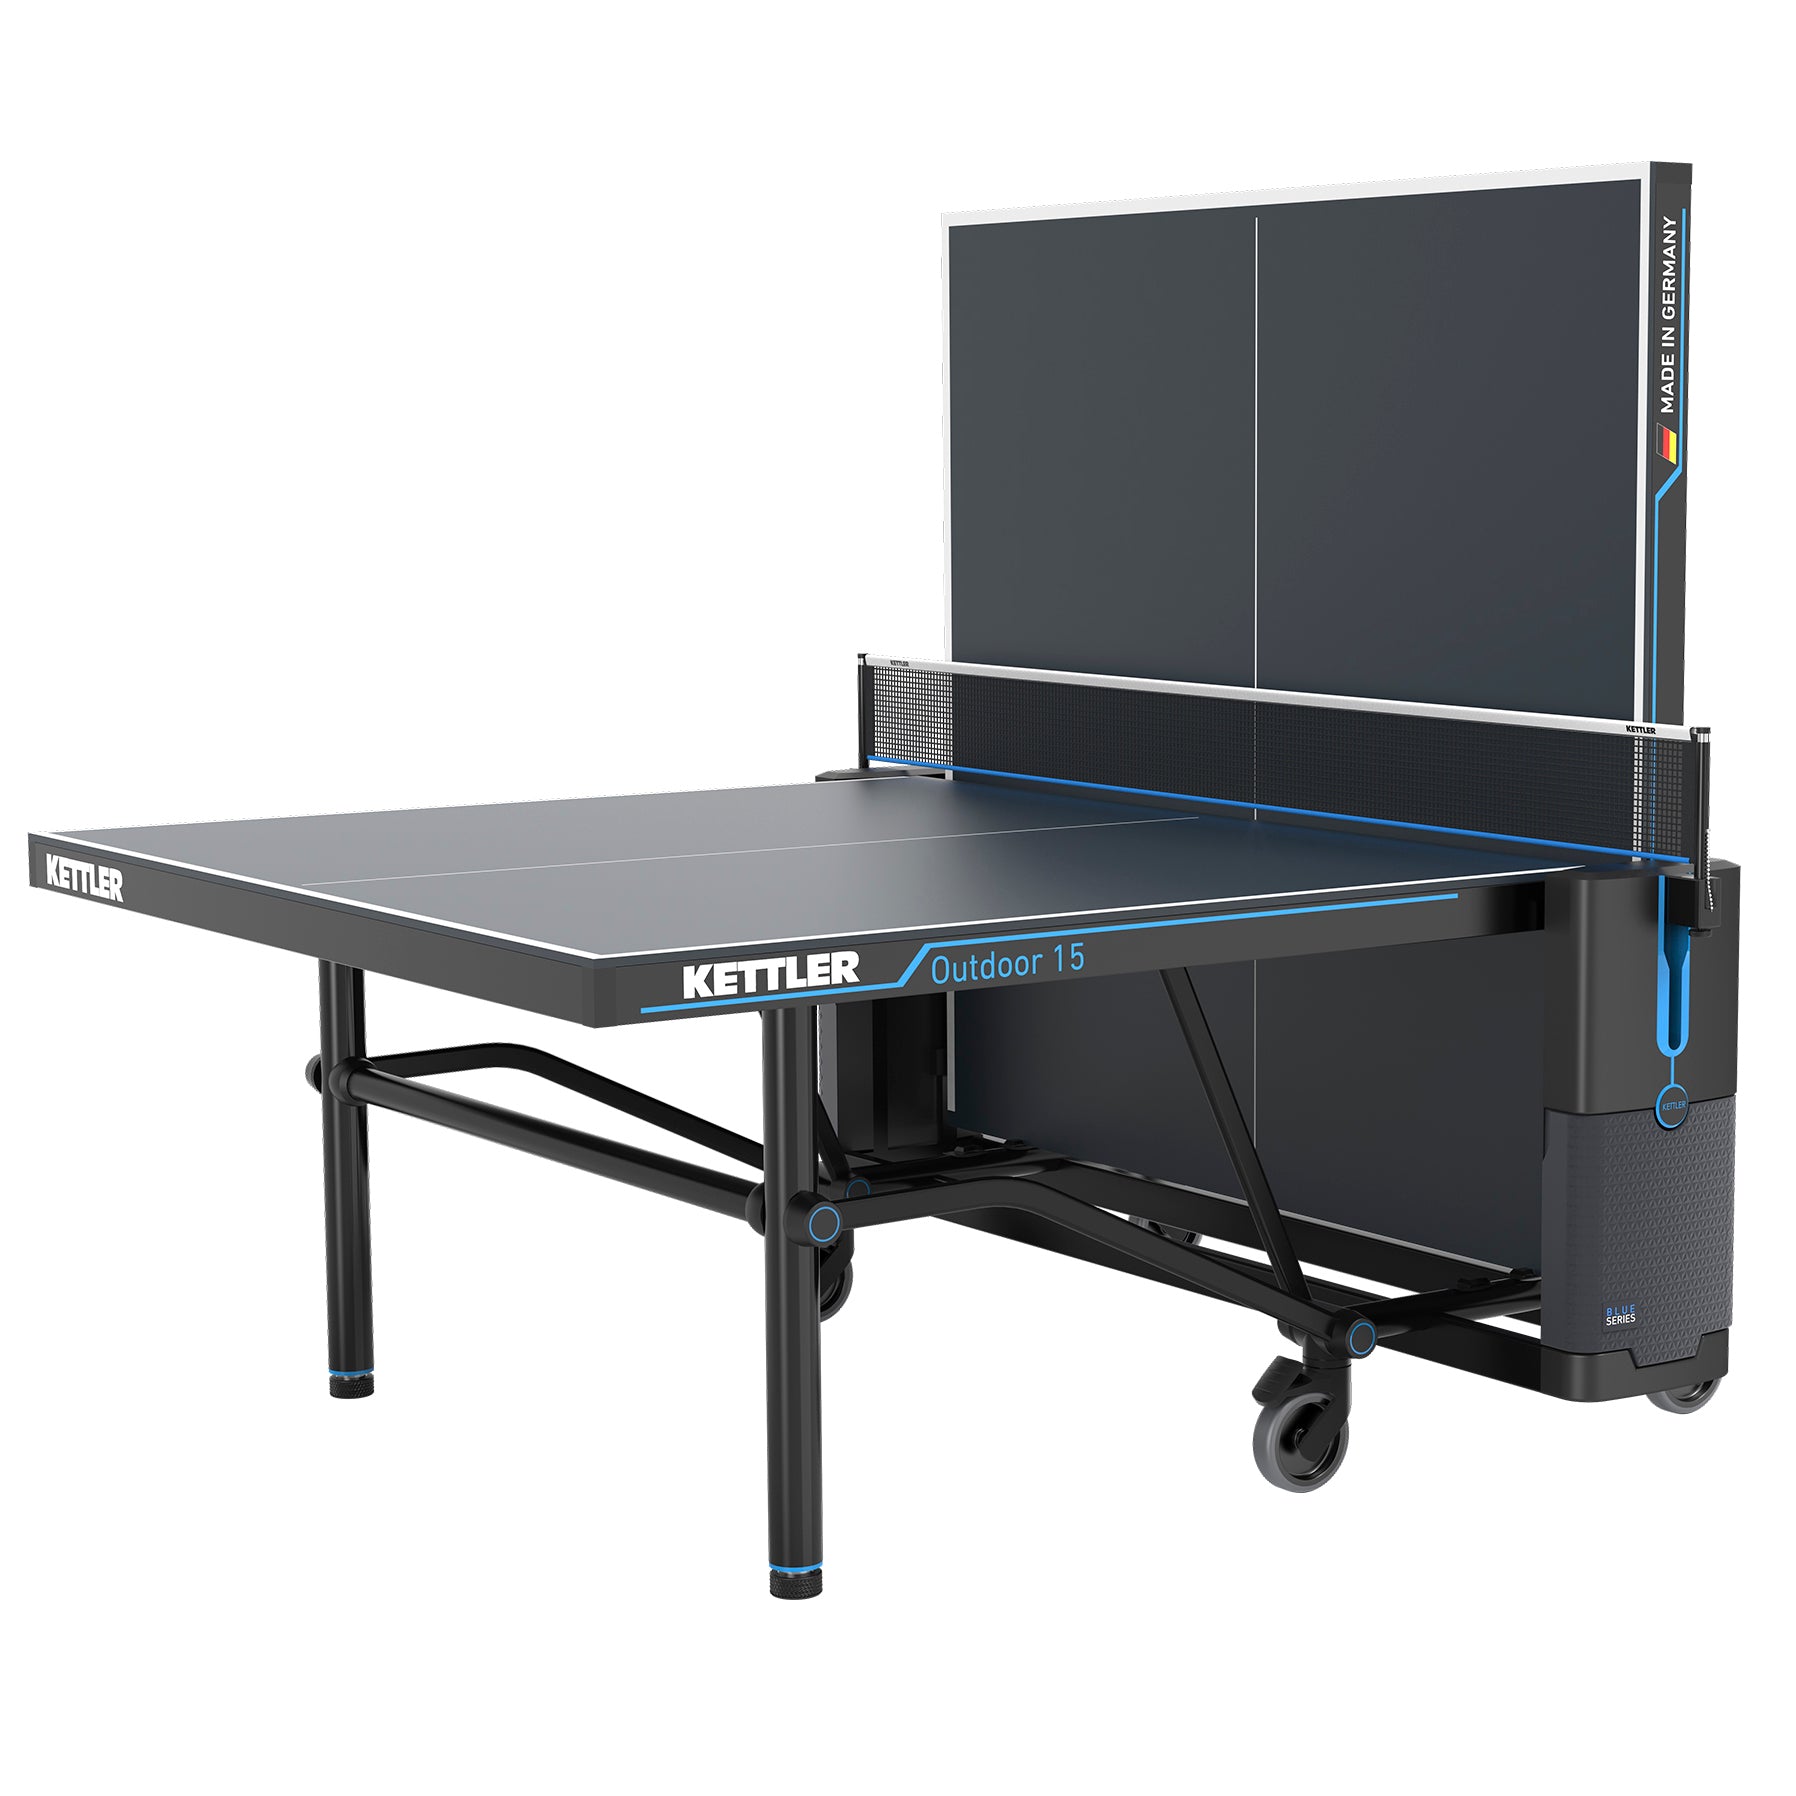 Built In Germany ping pong table in playback position 